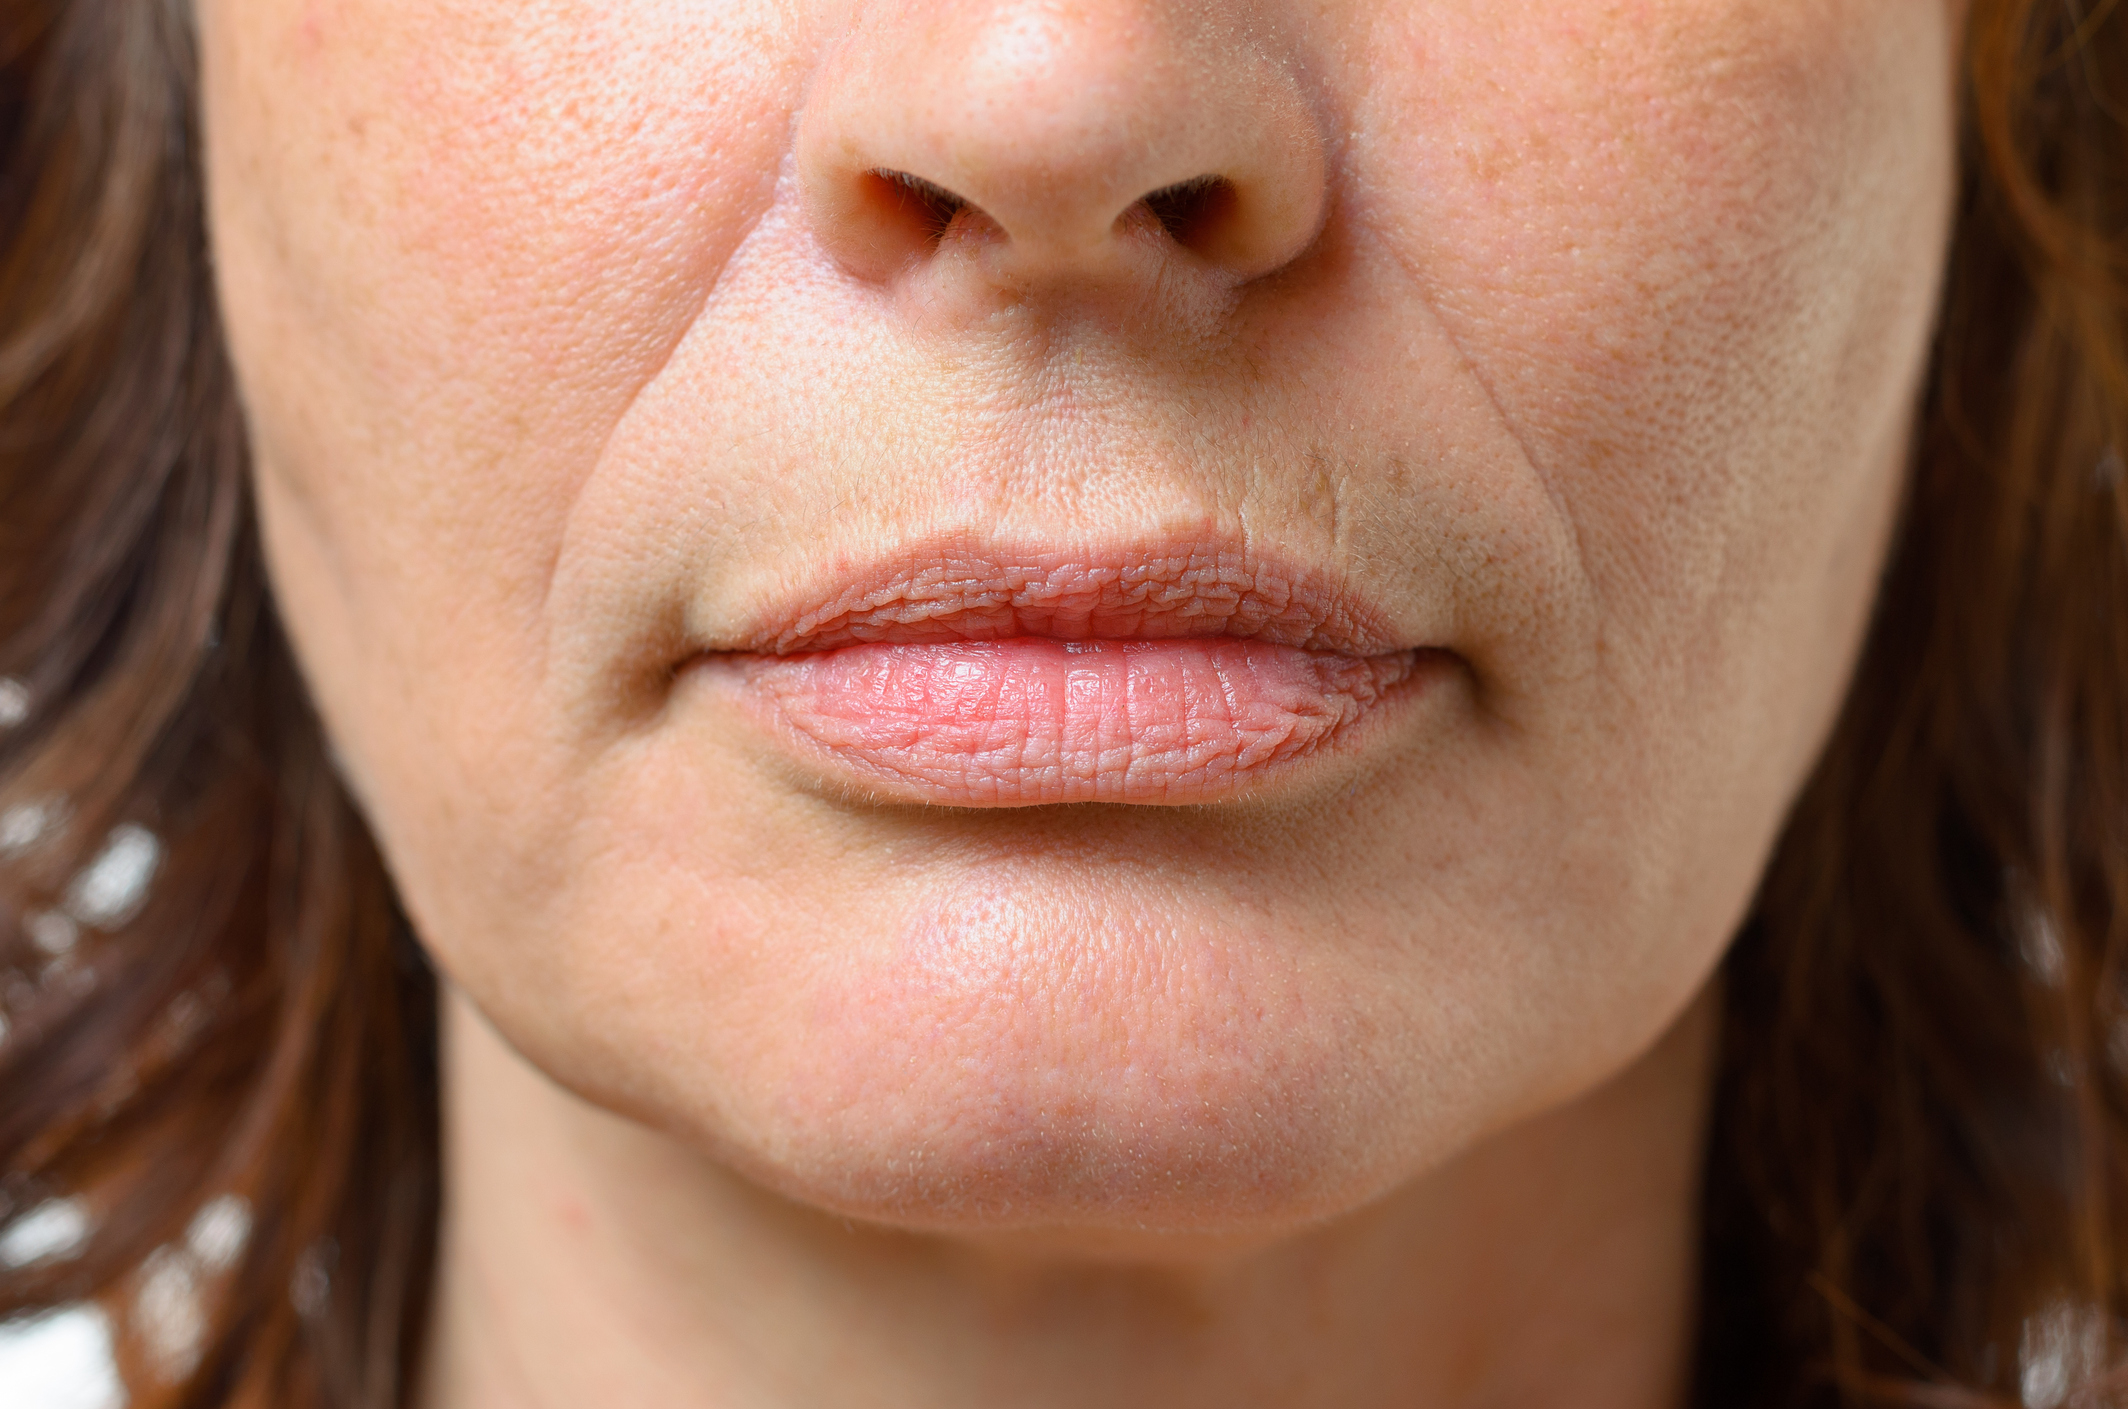 Close-up of an unidentified person&#x27;s lower face, showing nose and lips.
